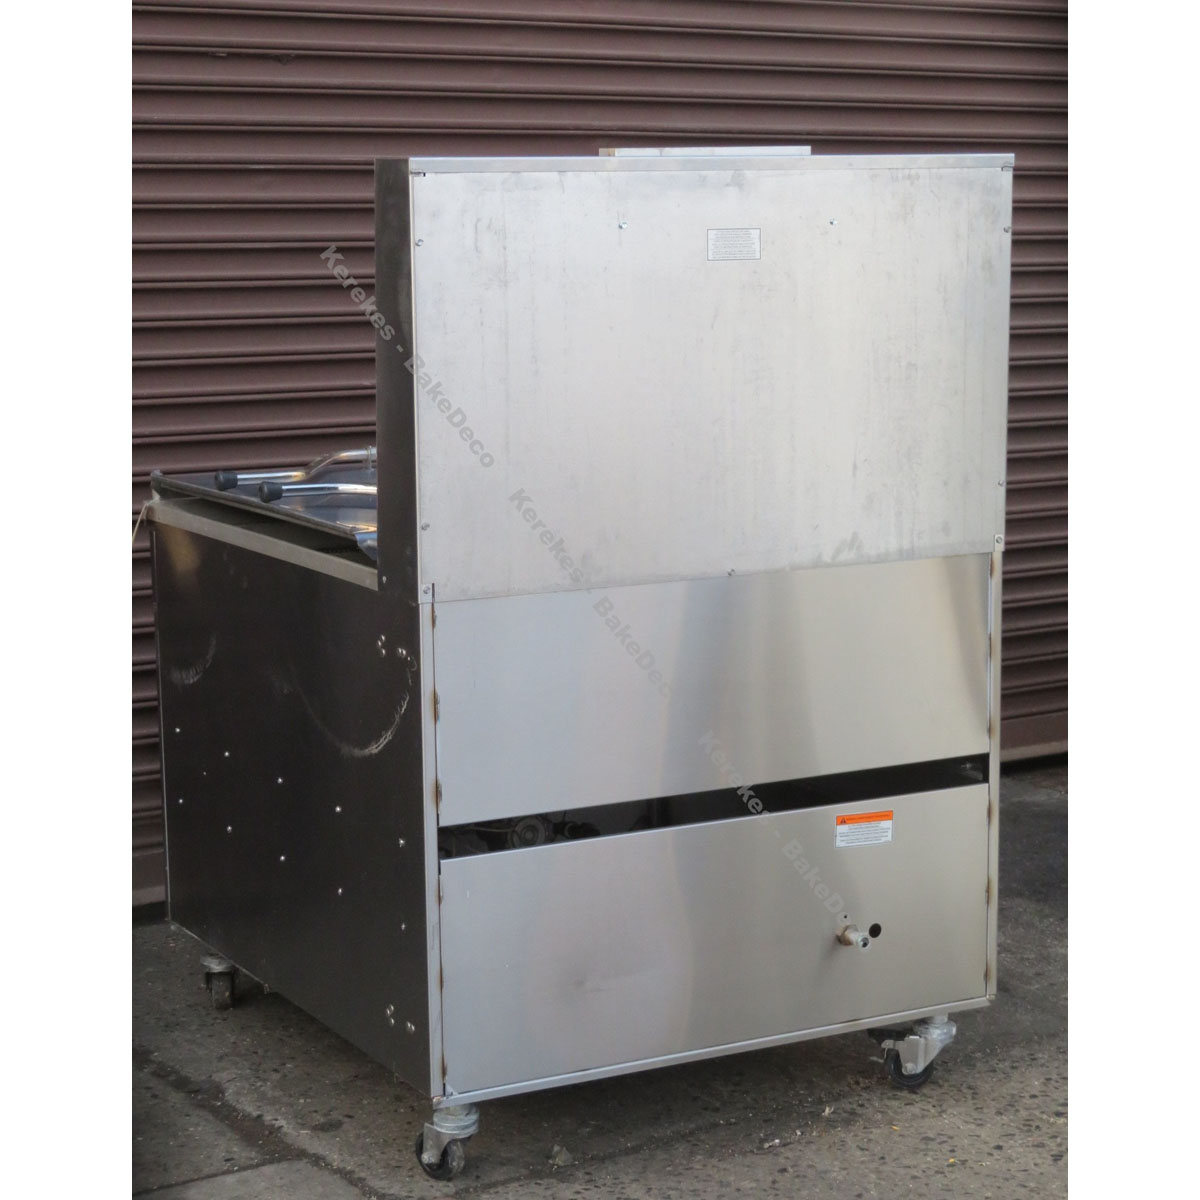 Pitco 34PSS Gas Donut Fryer with 210 Lb Oil Capacity, Used Great Condition image 5